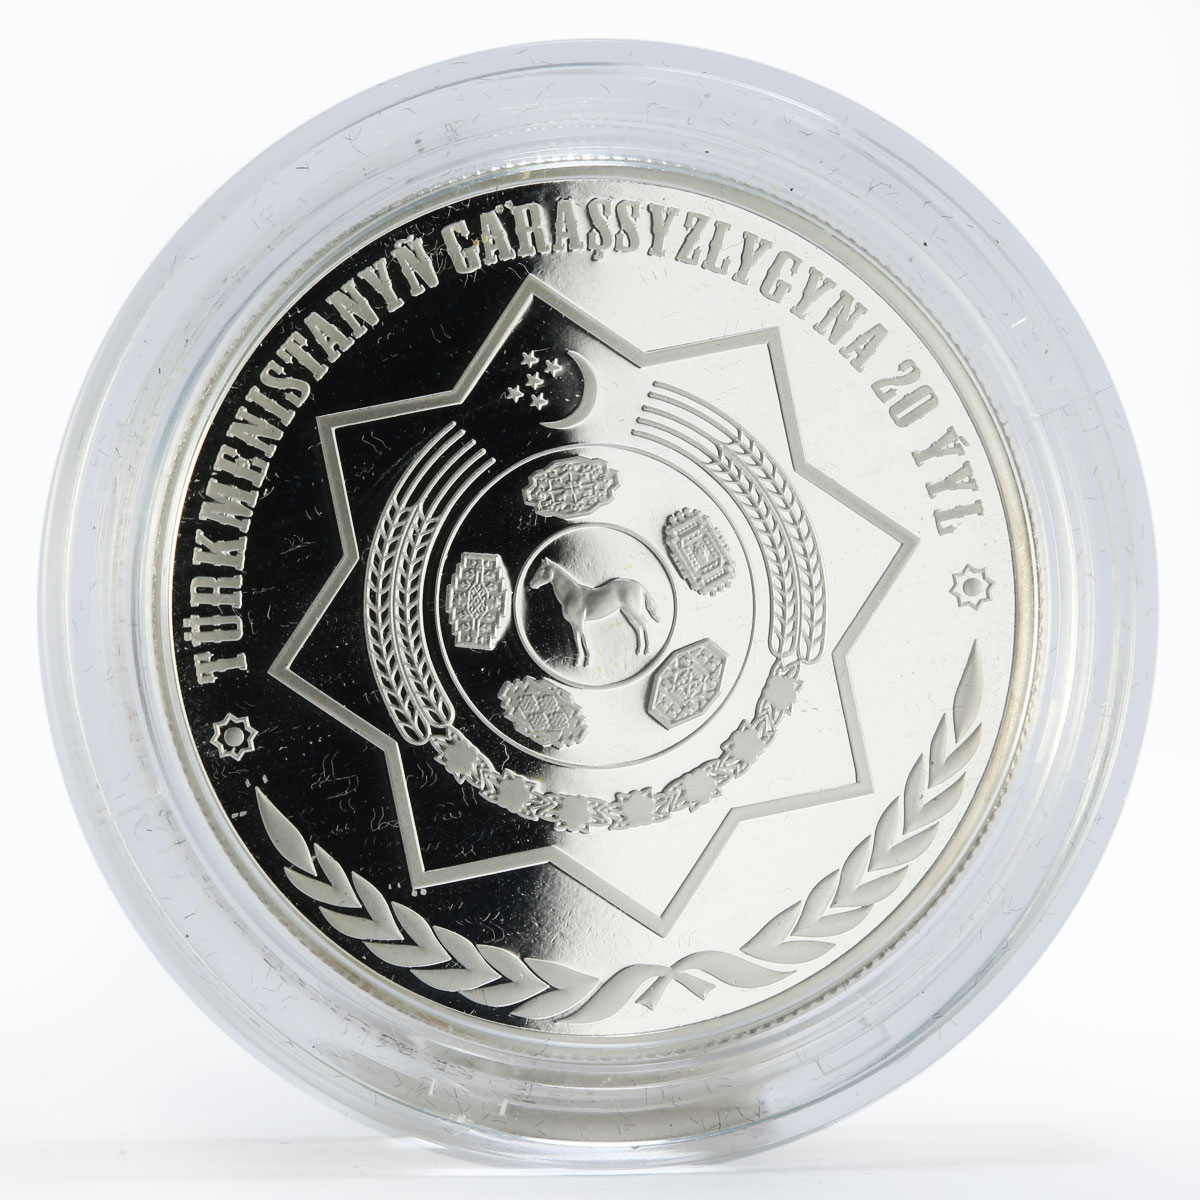 Turkmenistan 10 manat  20 years of Independence Monument proof silver coin 2011